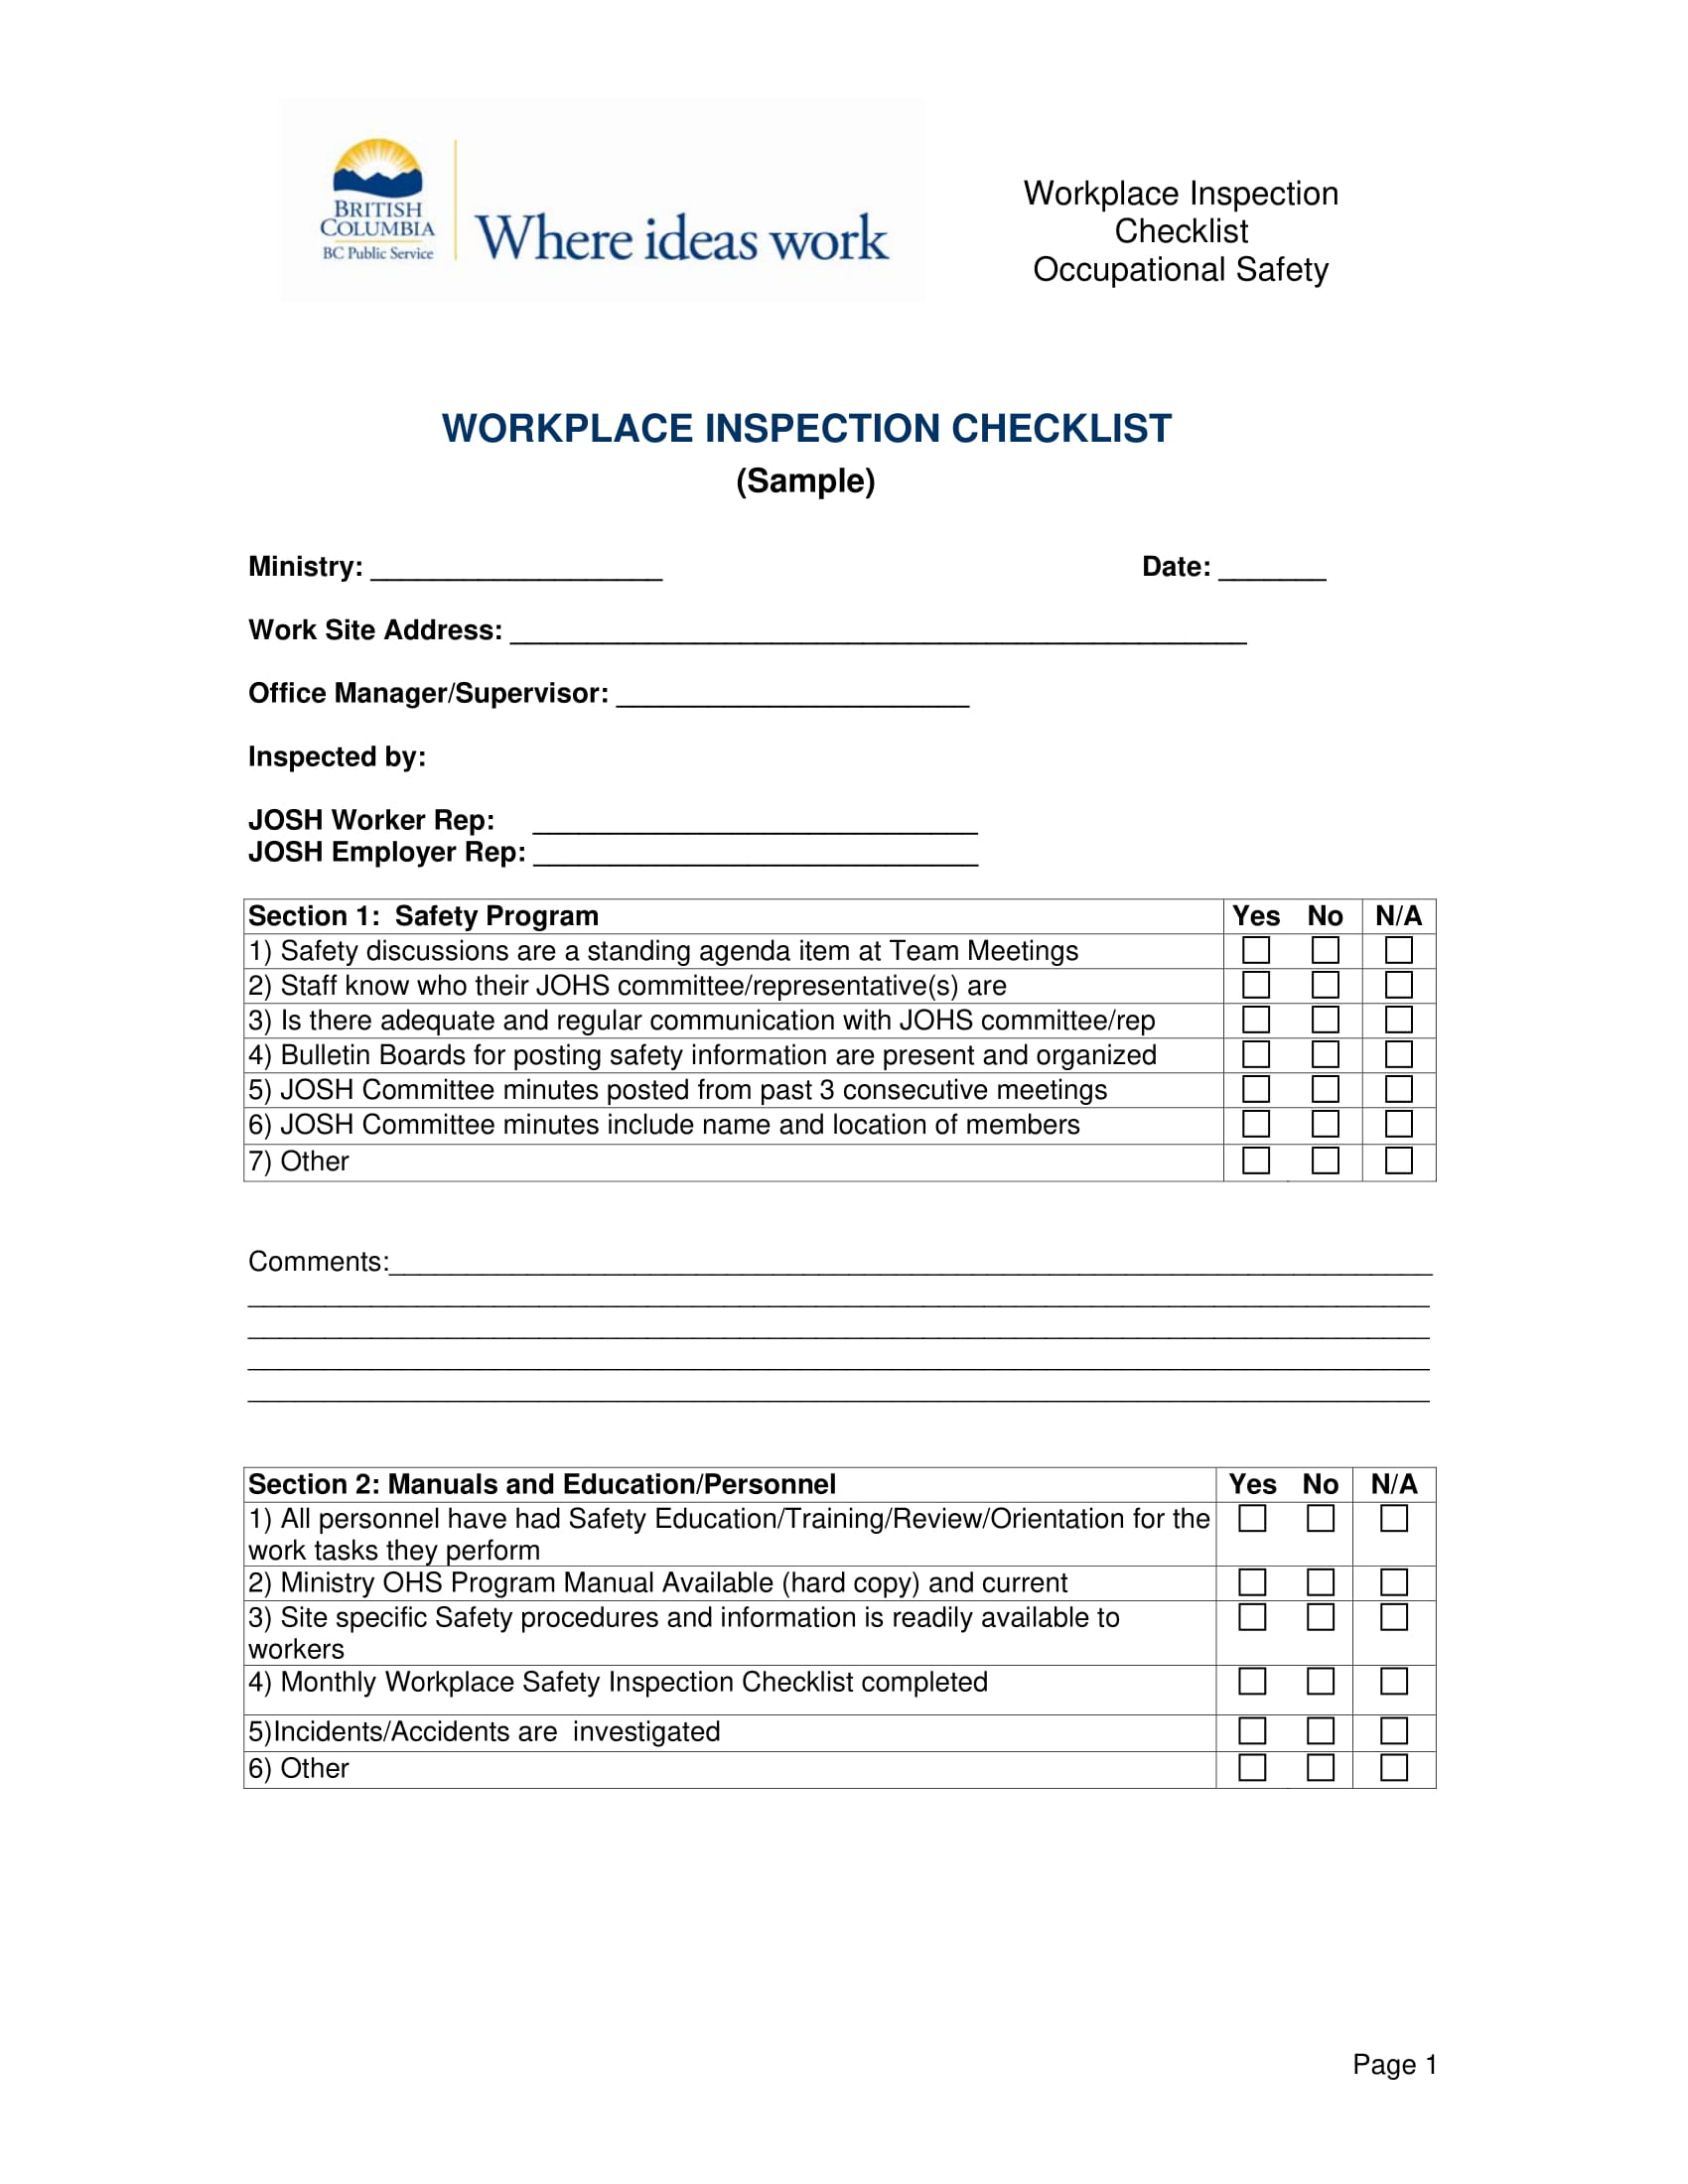 Workplace Safety Inspection Checklist Example